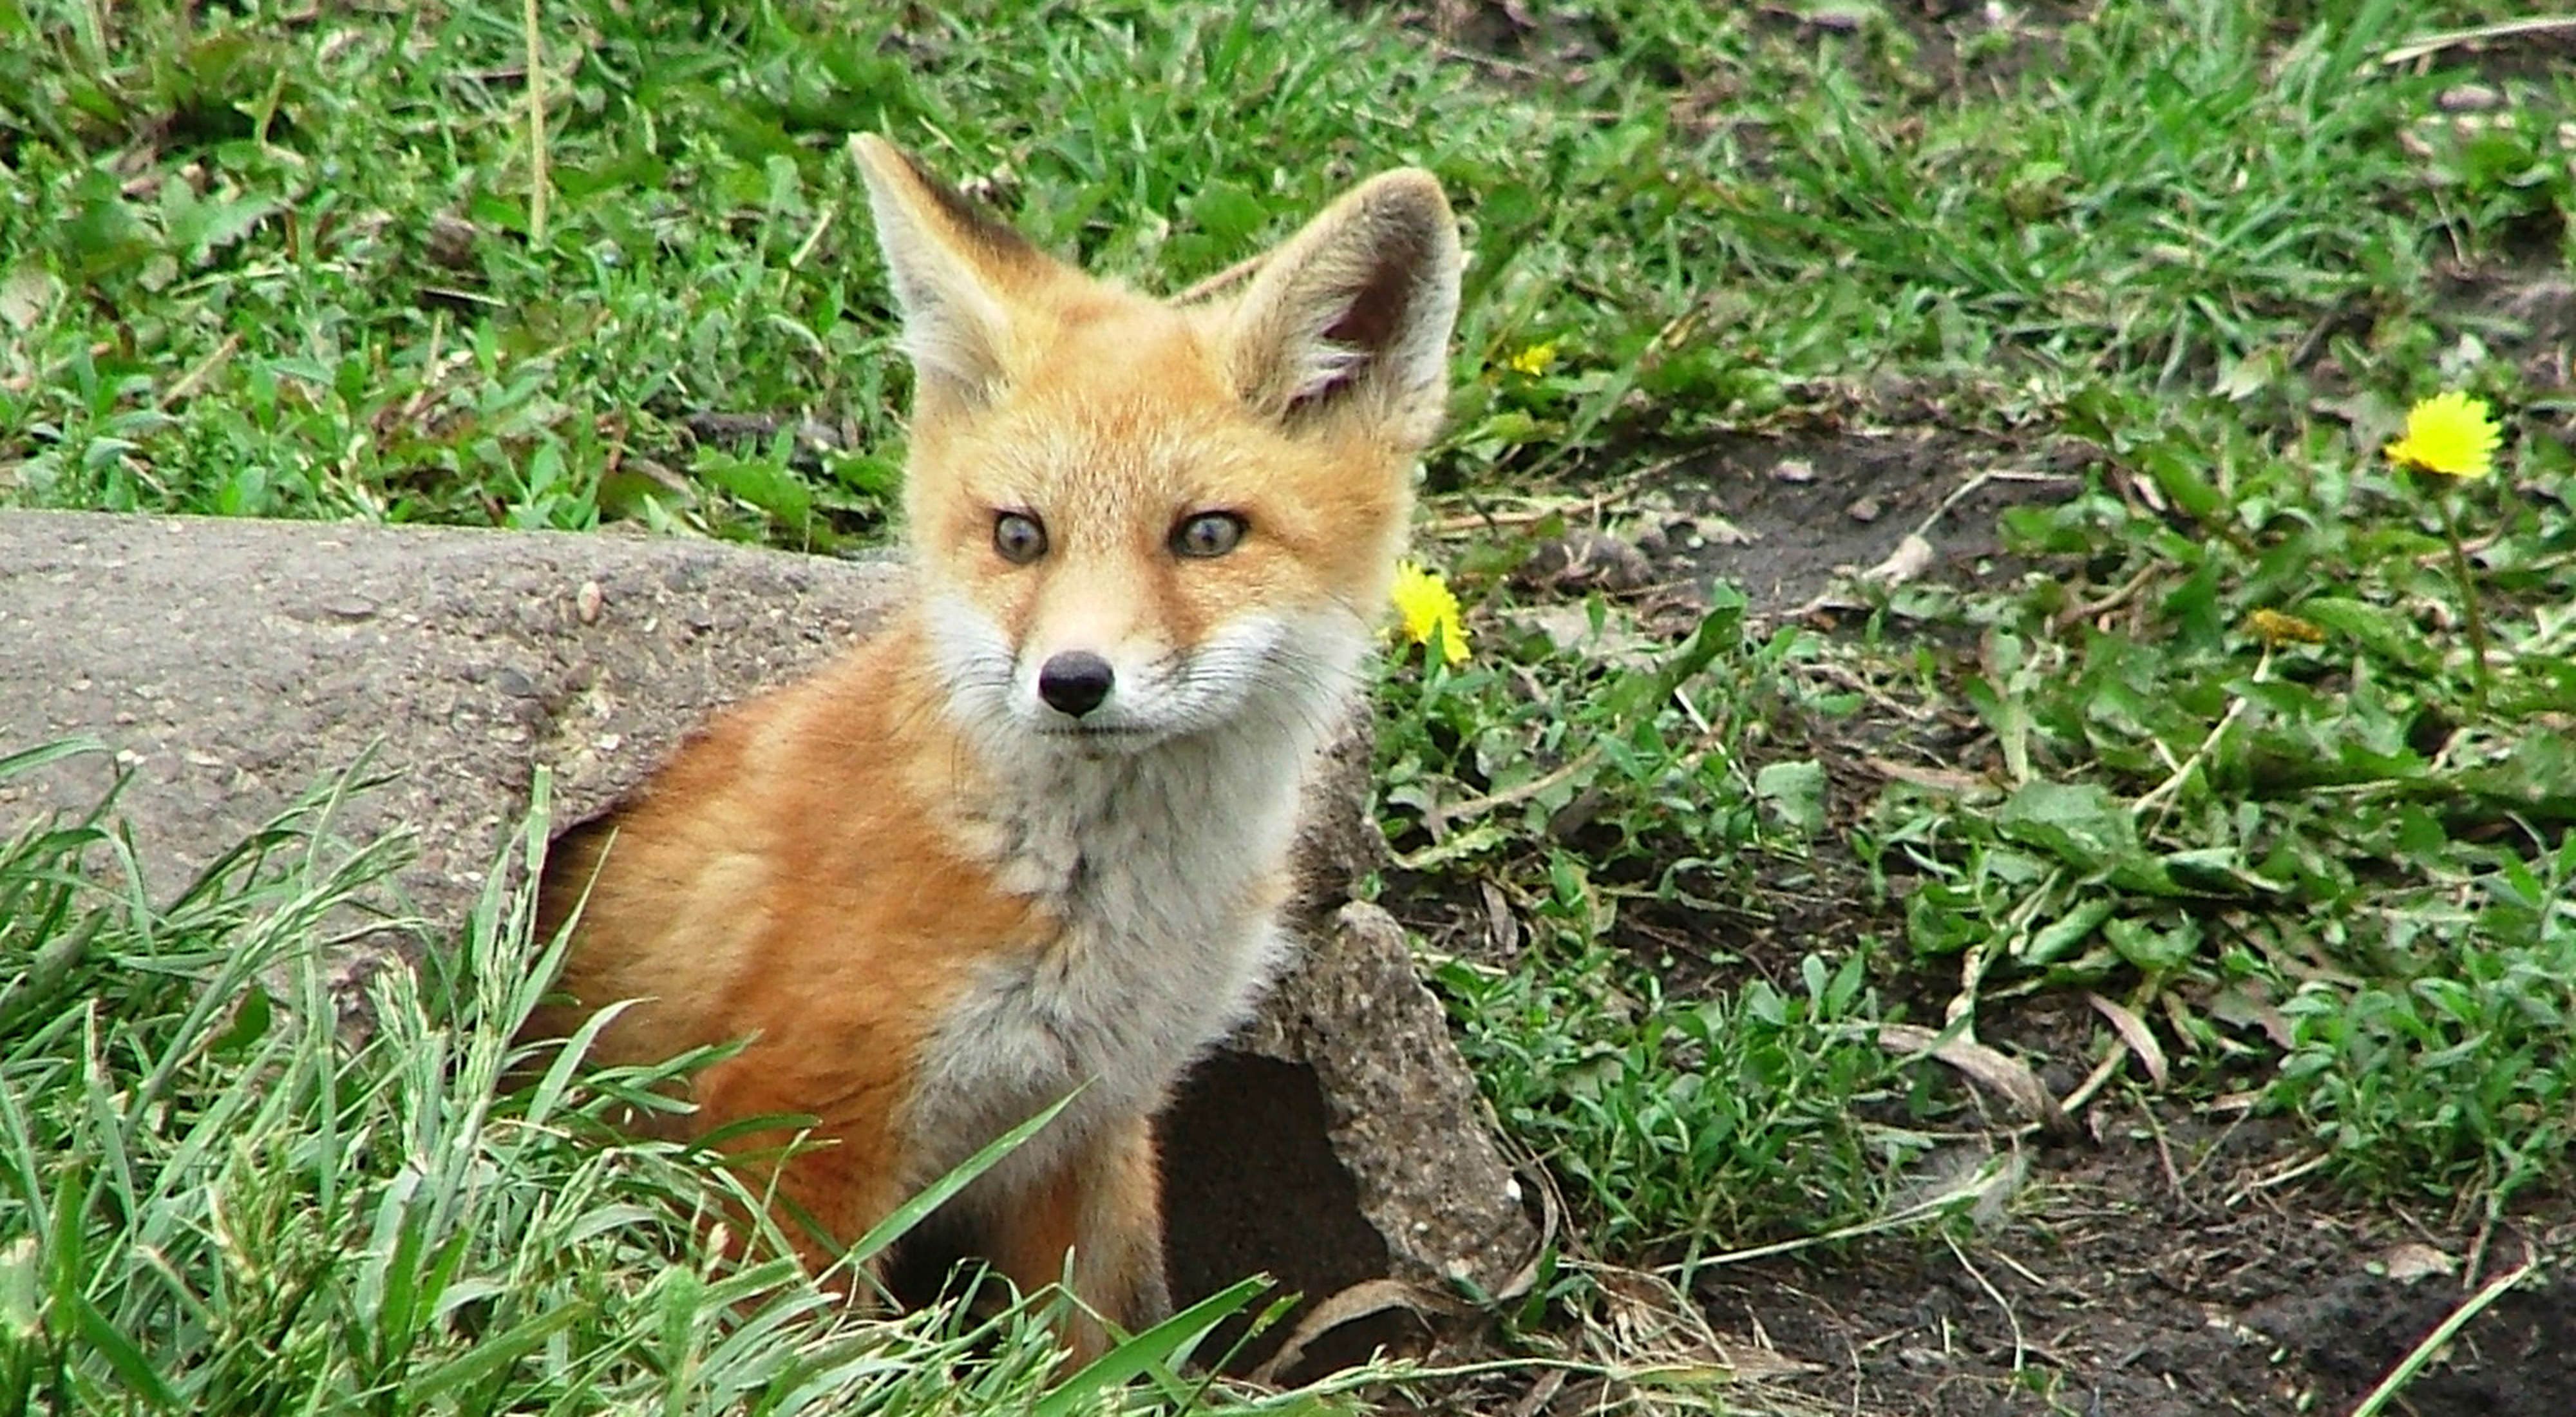 A fox kit pictured in the center of the frame looks to the lefthand side of the frame, emerging from a log set against a field with green grass.